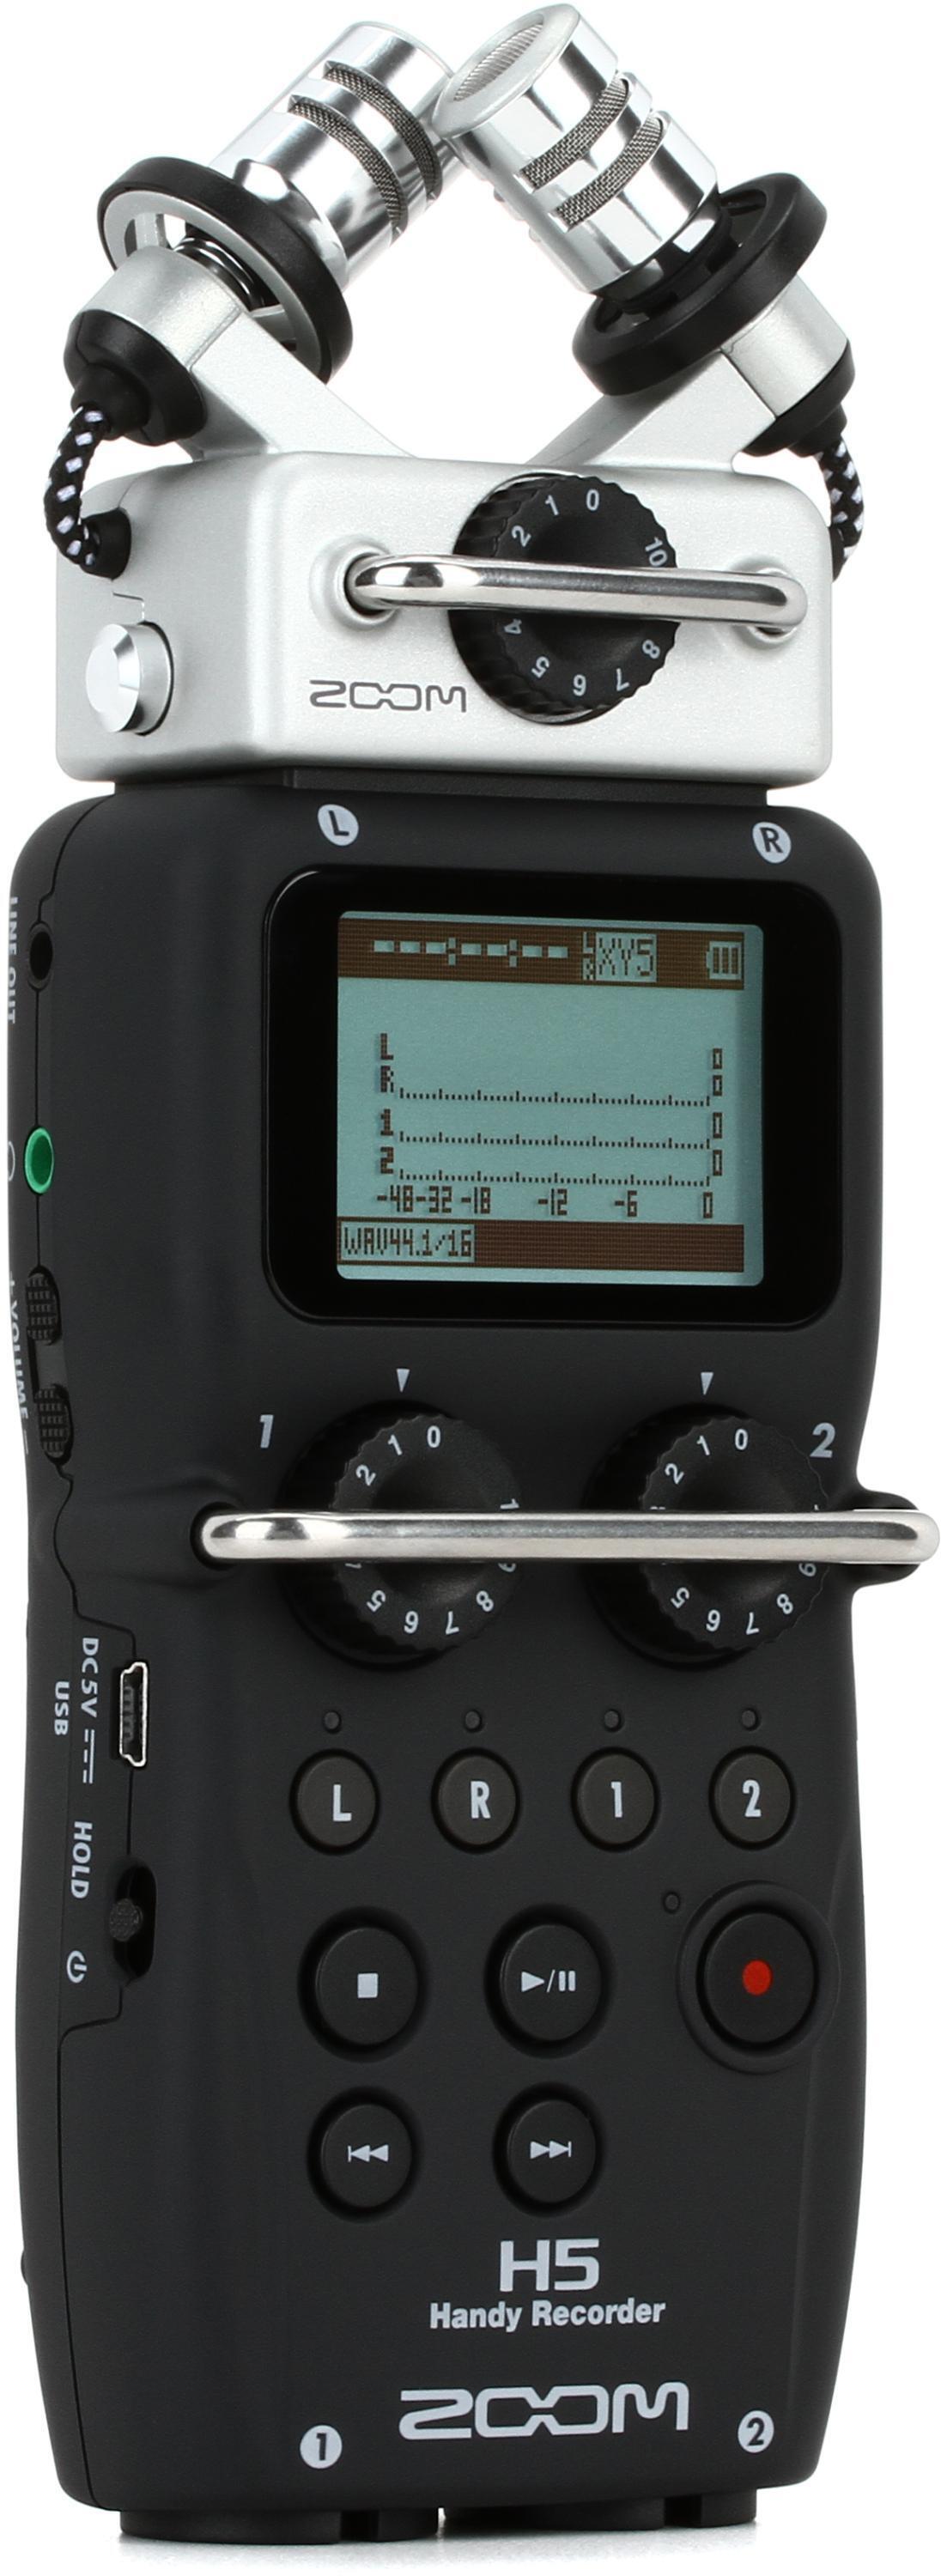 Rent a Zoom H4n Pro 4-Channel Handy Recorder, Best Prices